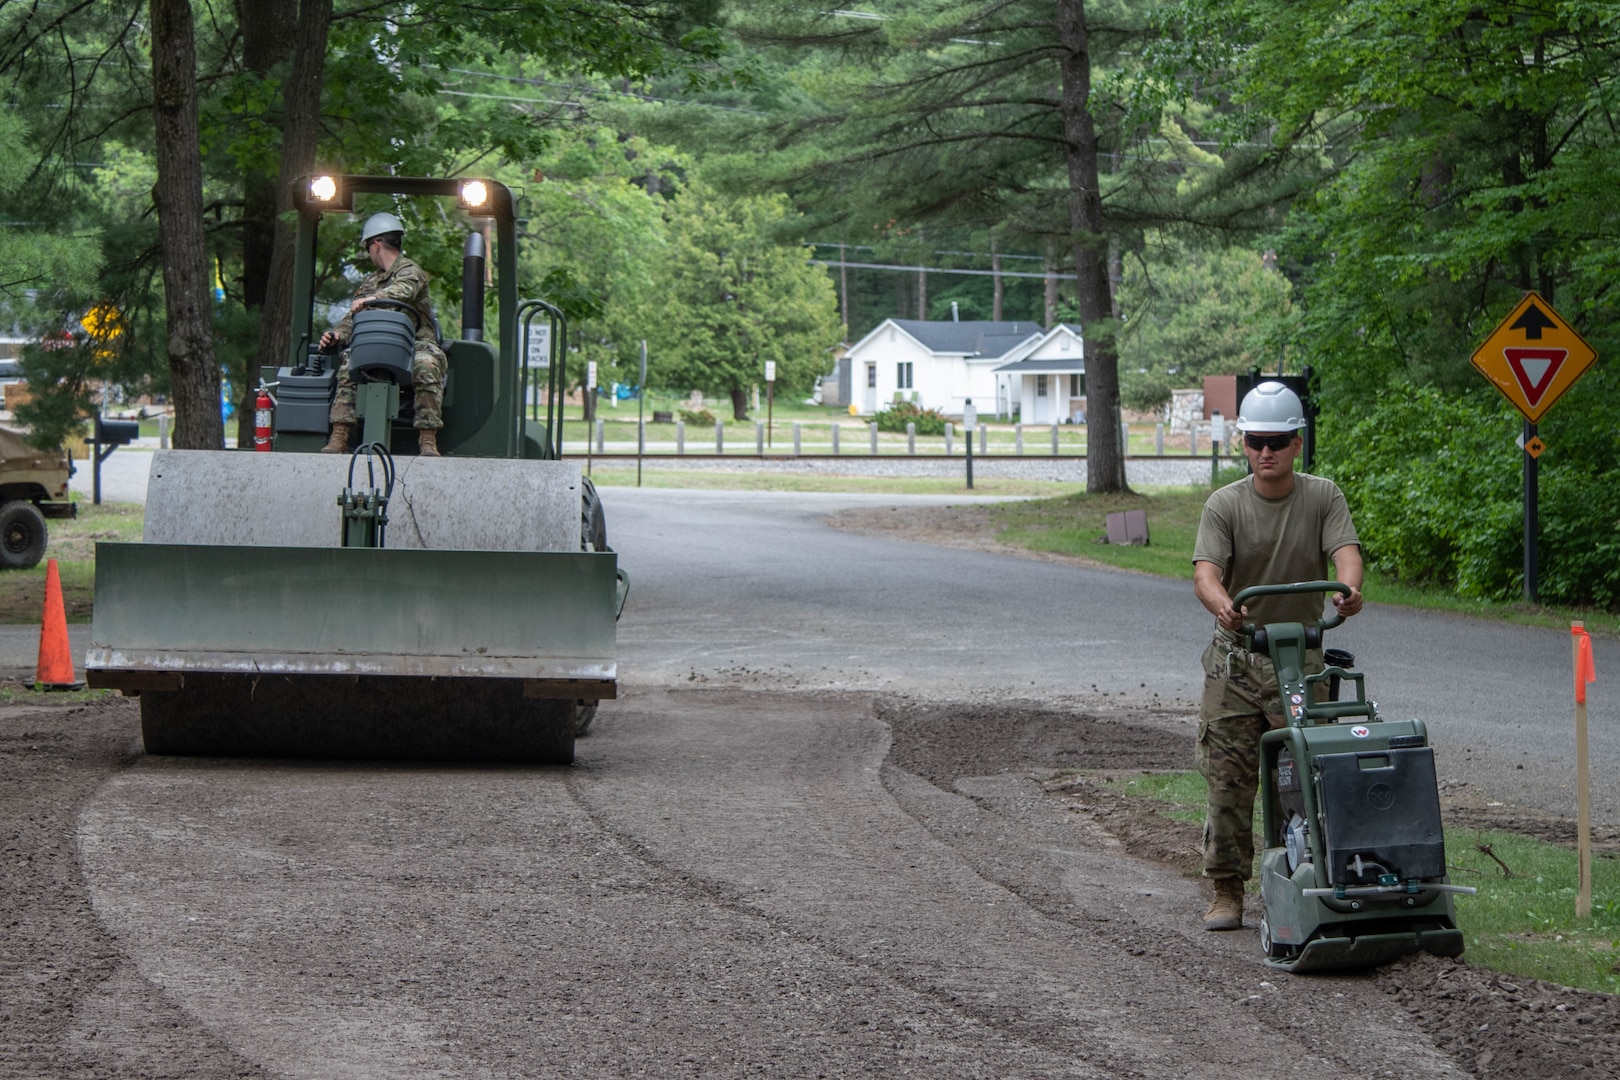 Approximately 100 Soldiers from the 1430th Engineer Company, 107th Engineer Battalion, Michigan National Guard, conducted multiple engineering projects at Otsego Lake State Park and Young State Park in June 2022. The Michigan National Guard and Michigan Department of Natural Resources will work together again to improve state park facilities beginning in spring 2024.